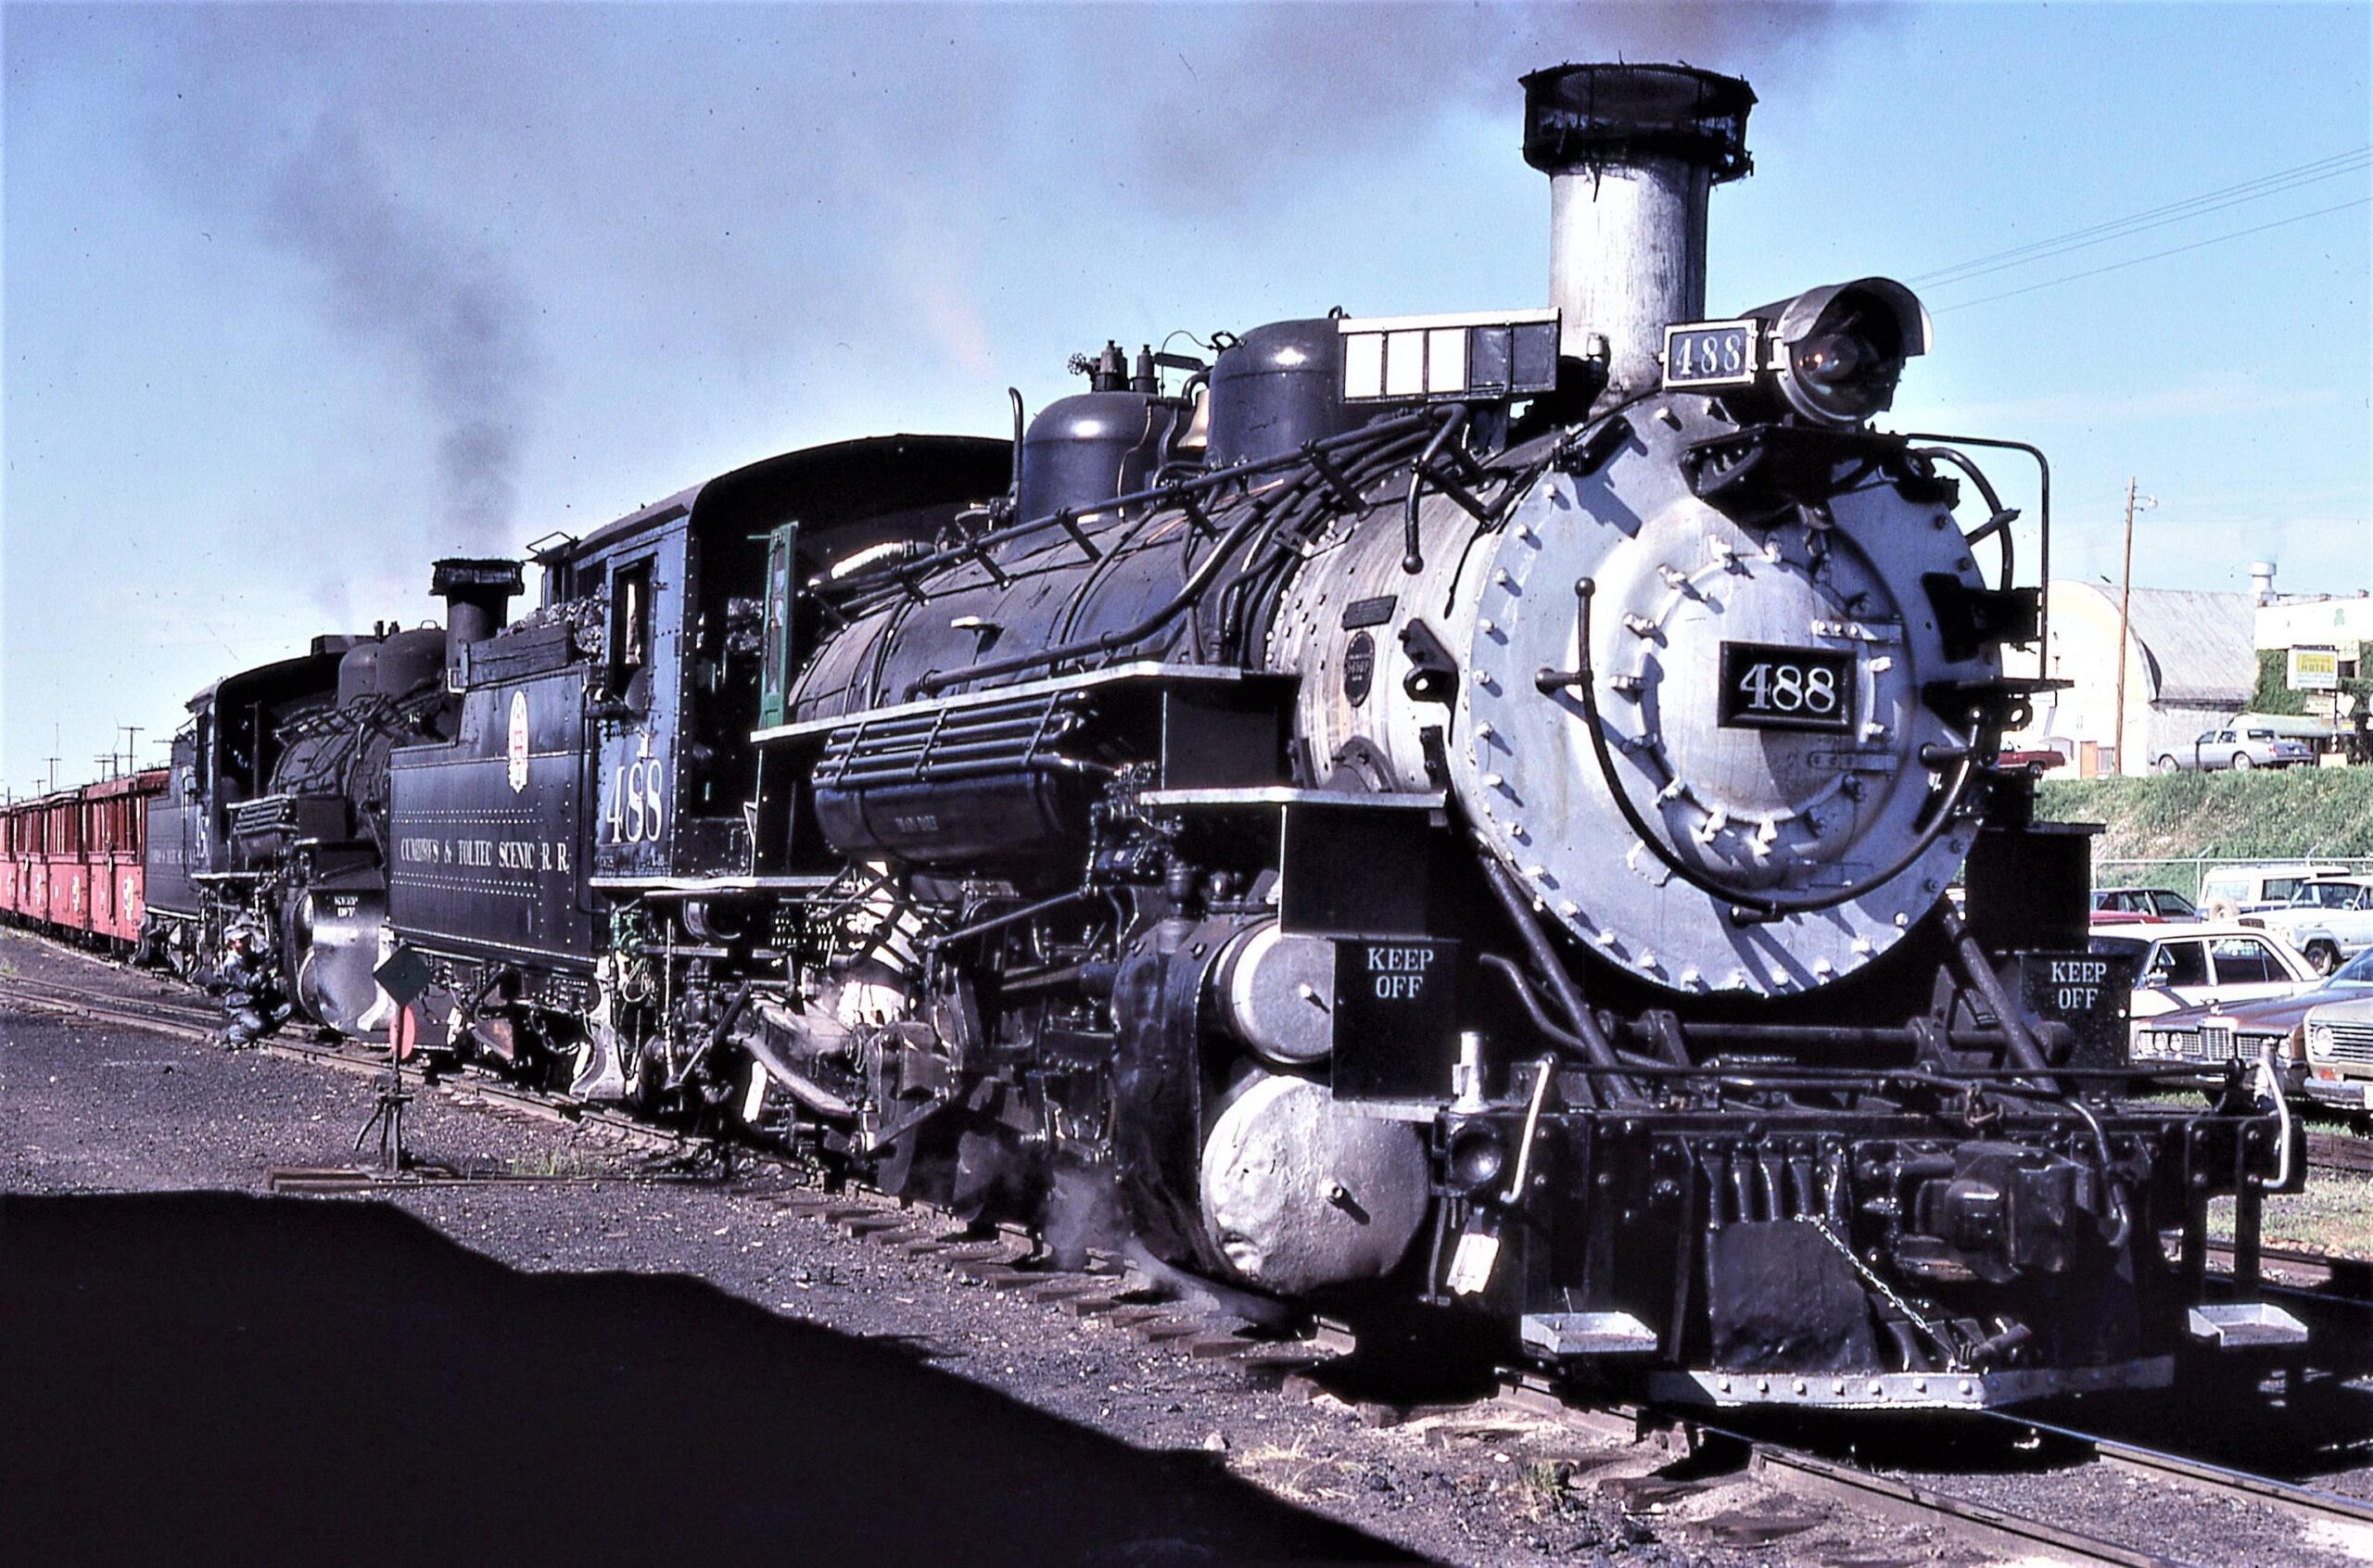 Cumbres and Toltec Scenic Railroad | Chama, New Mexico | 2-8-2 #488 narrow gauge steam locomotive, plus one, and passenger train | June 26, 1979 | Dick Flock photograph